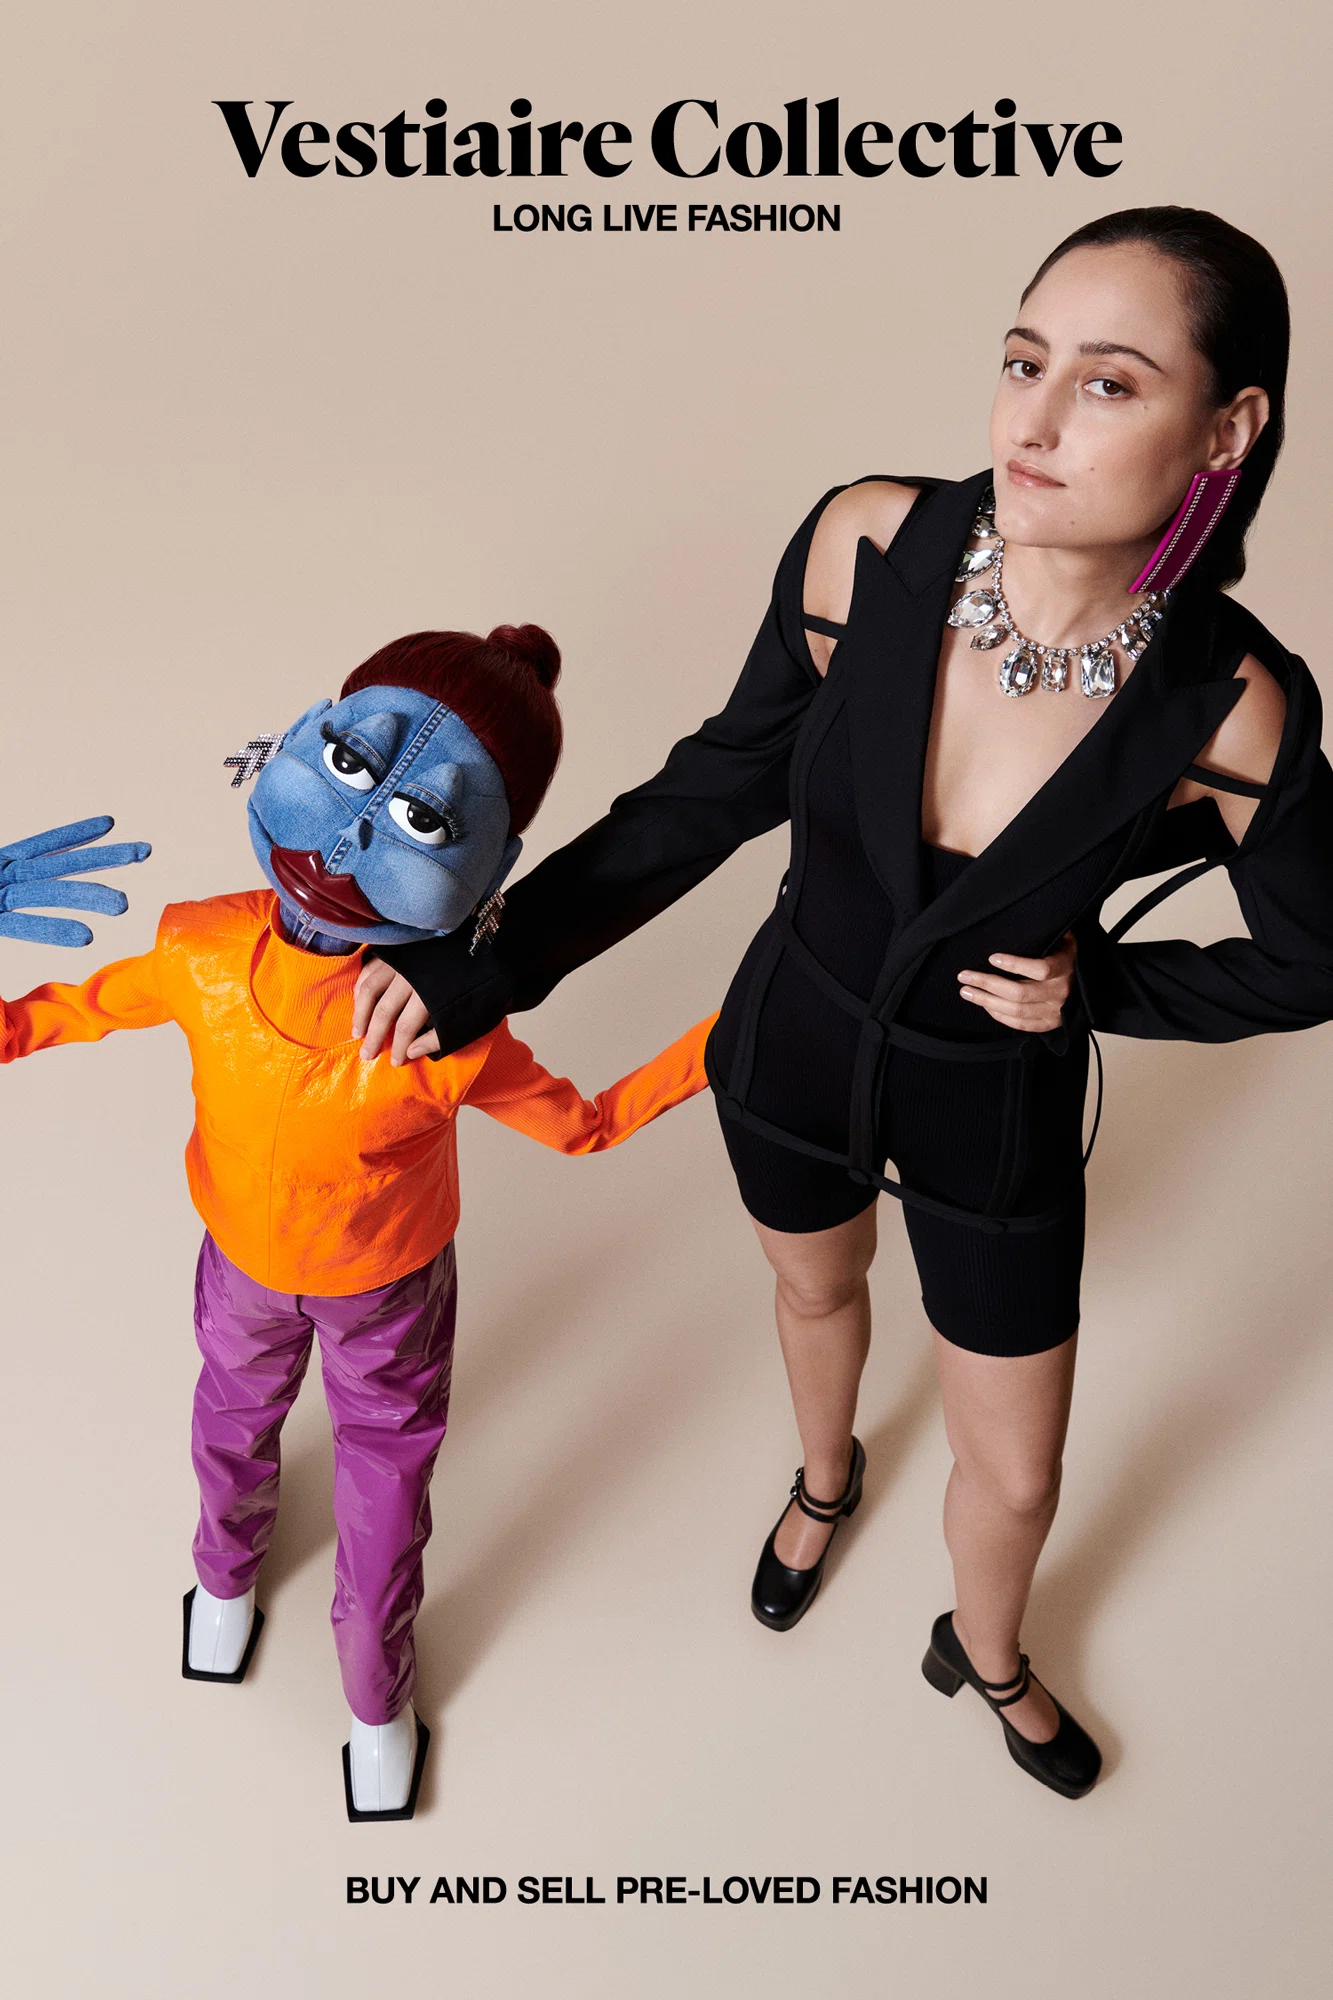 Vestiaire Collective fashion runway stars puppet models sewn from